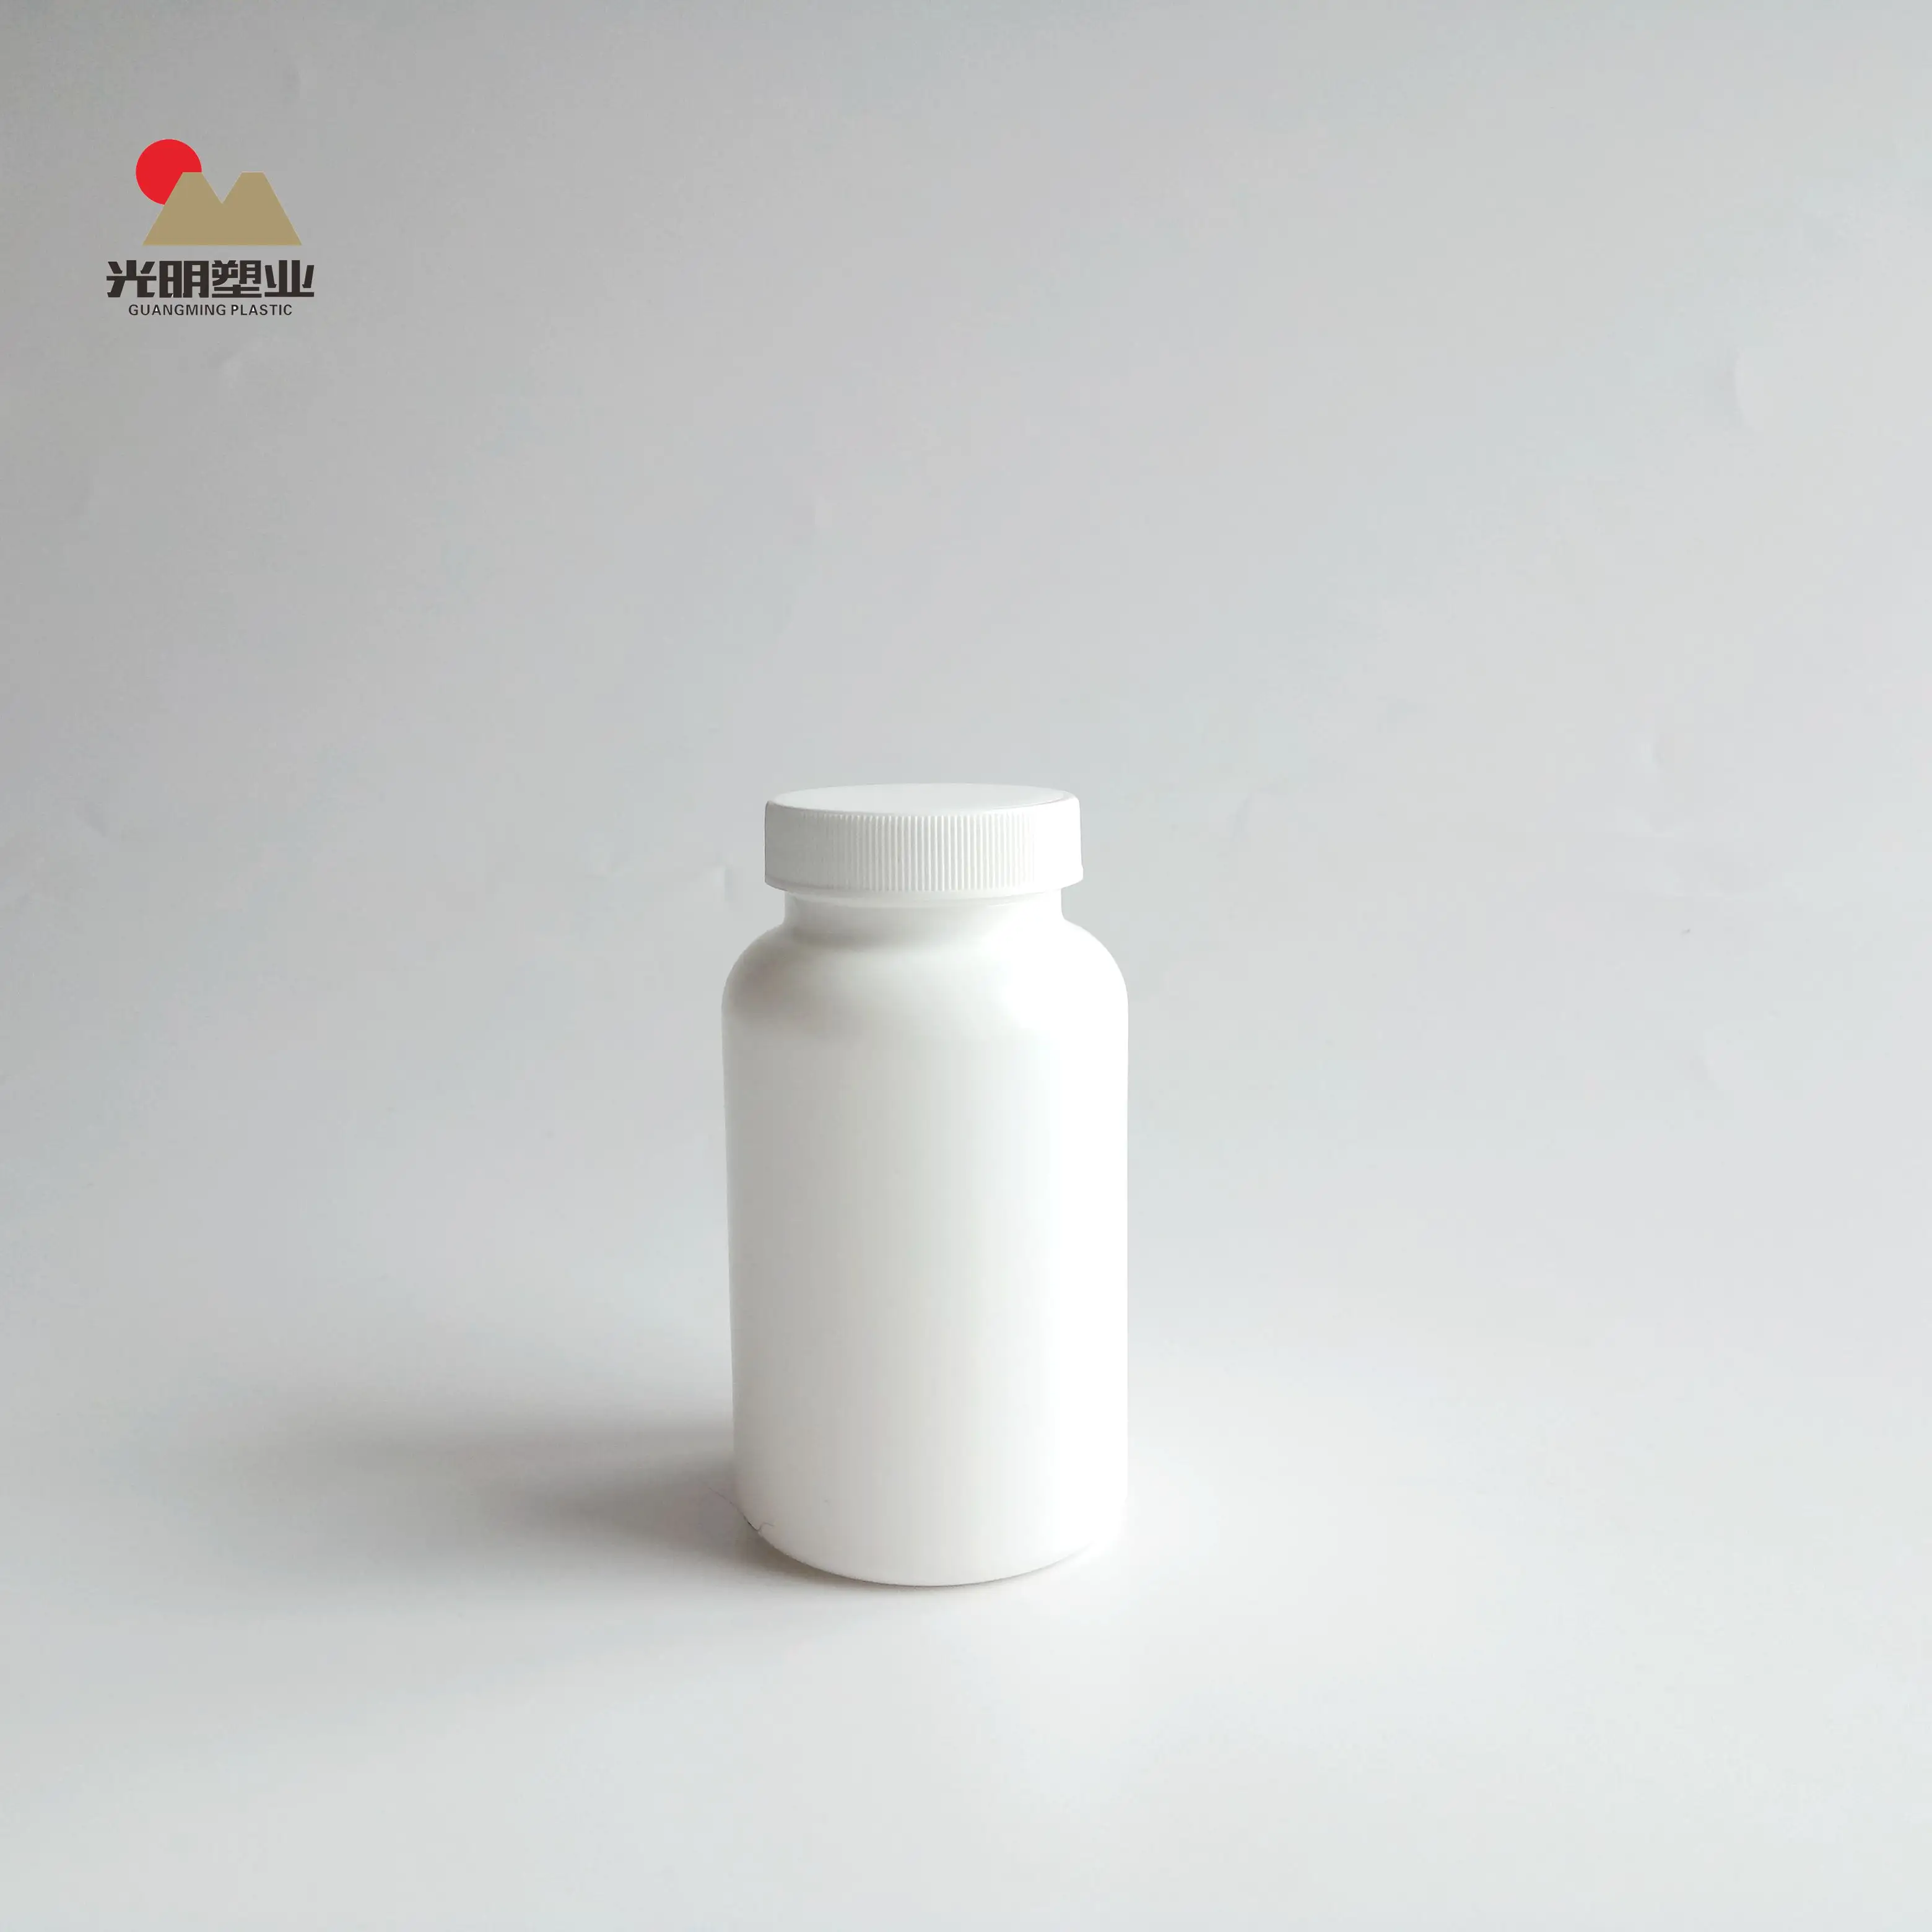 Discount White HDPE Empty Round Plastic Bottles  For Pill big tablets capsules Packaging 250ml